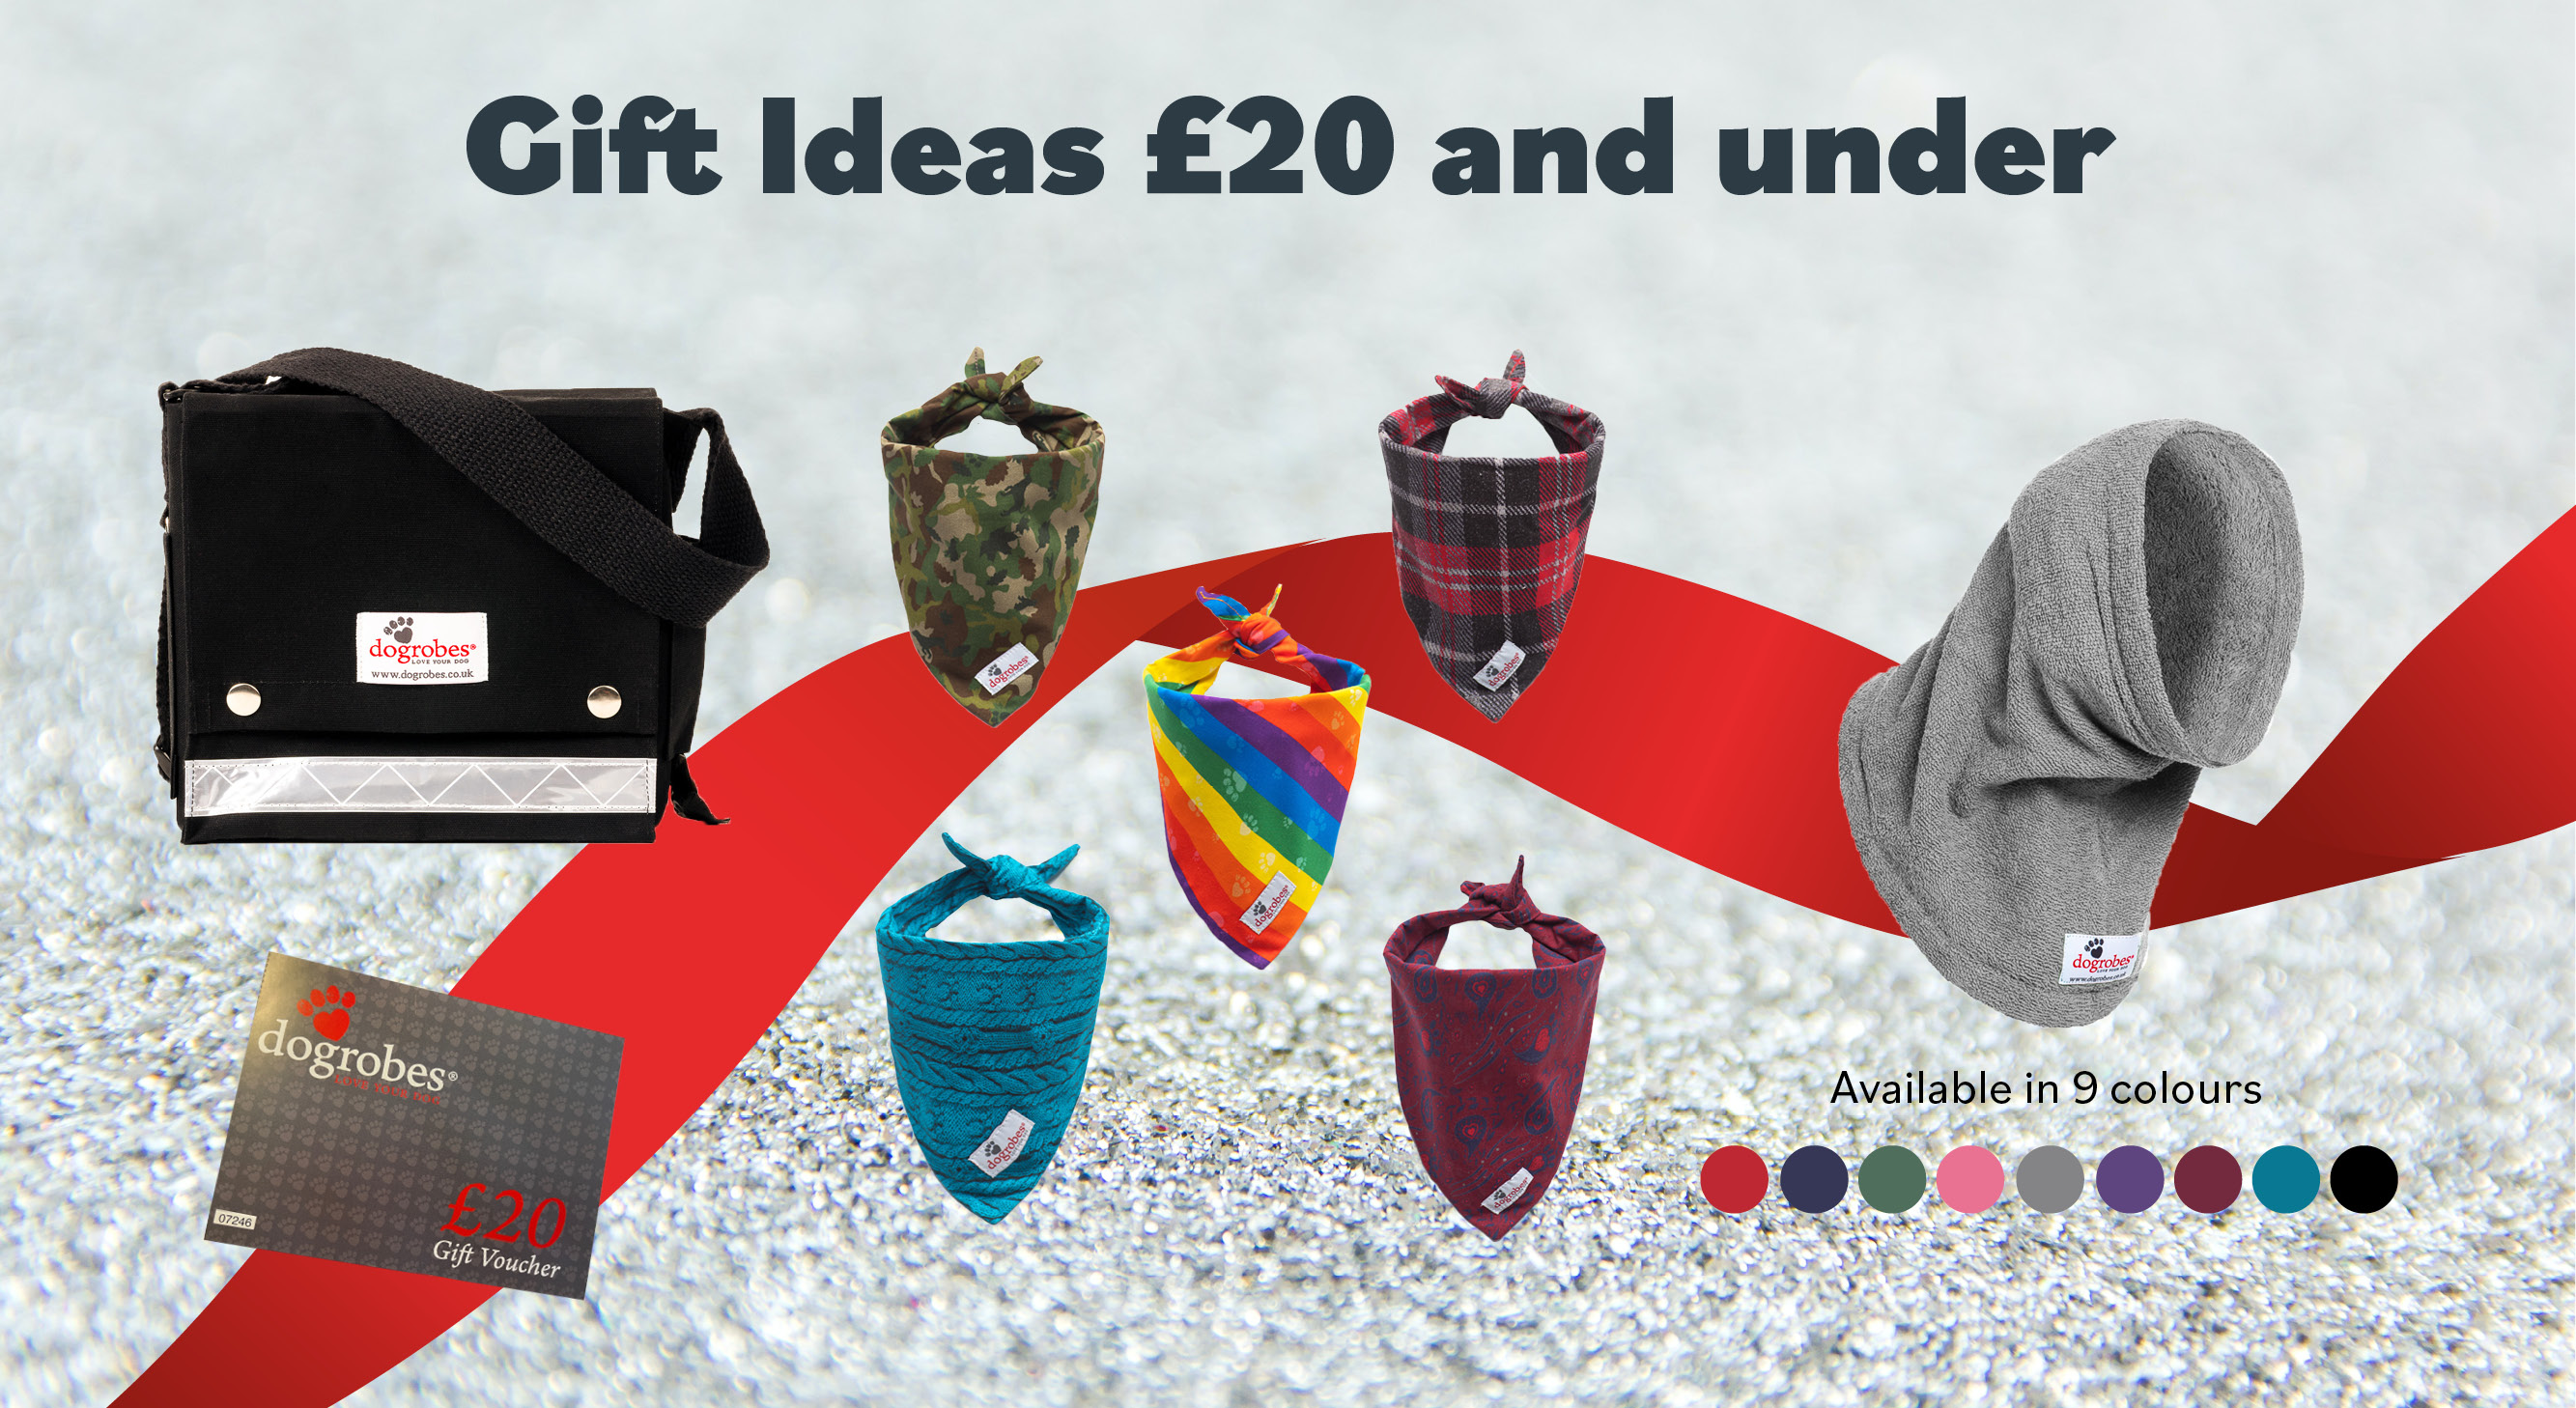 Gift Ideas for dogs and dog loves £20 and under